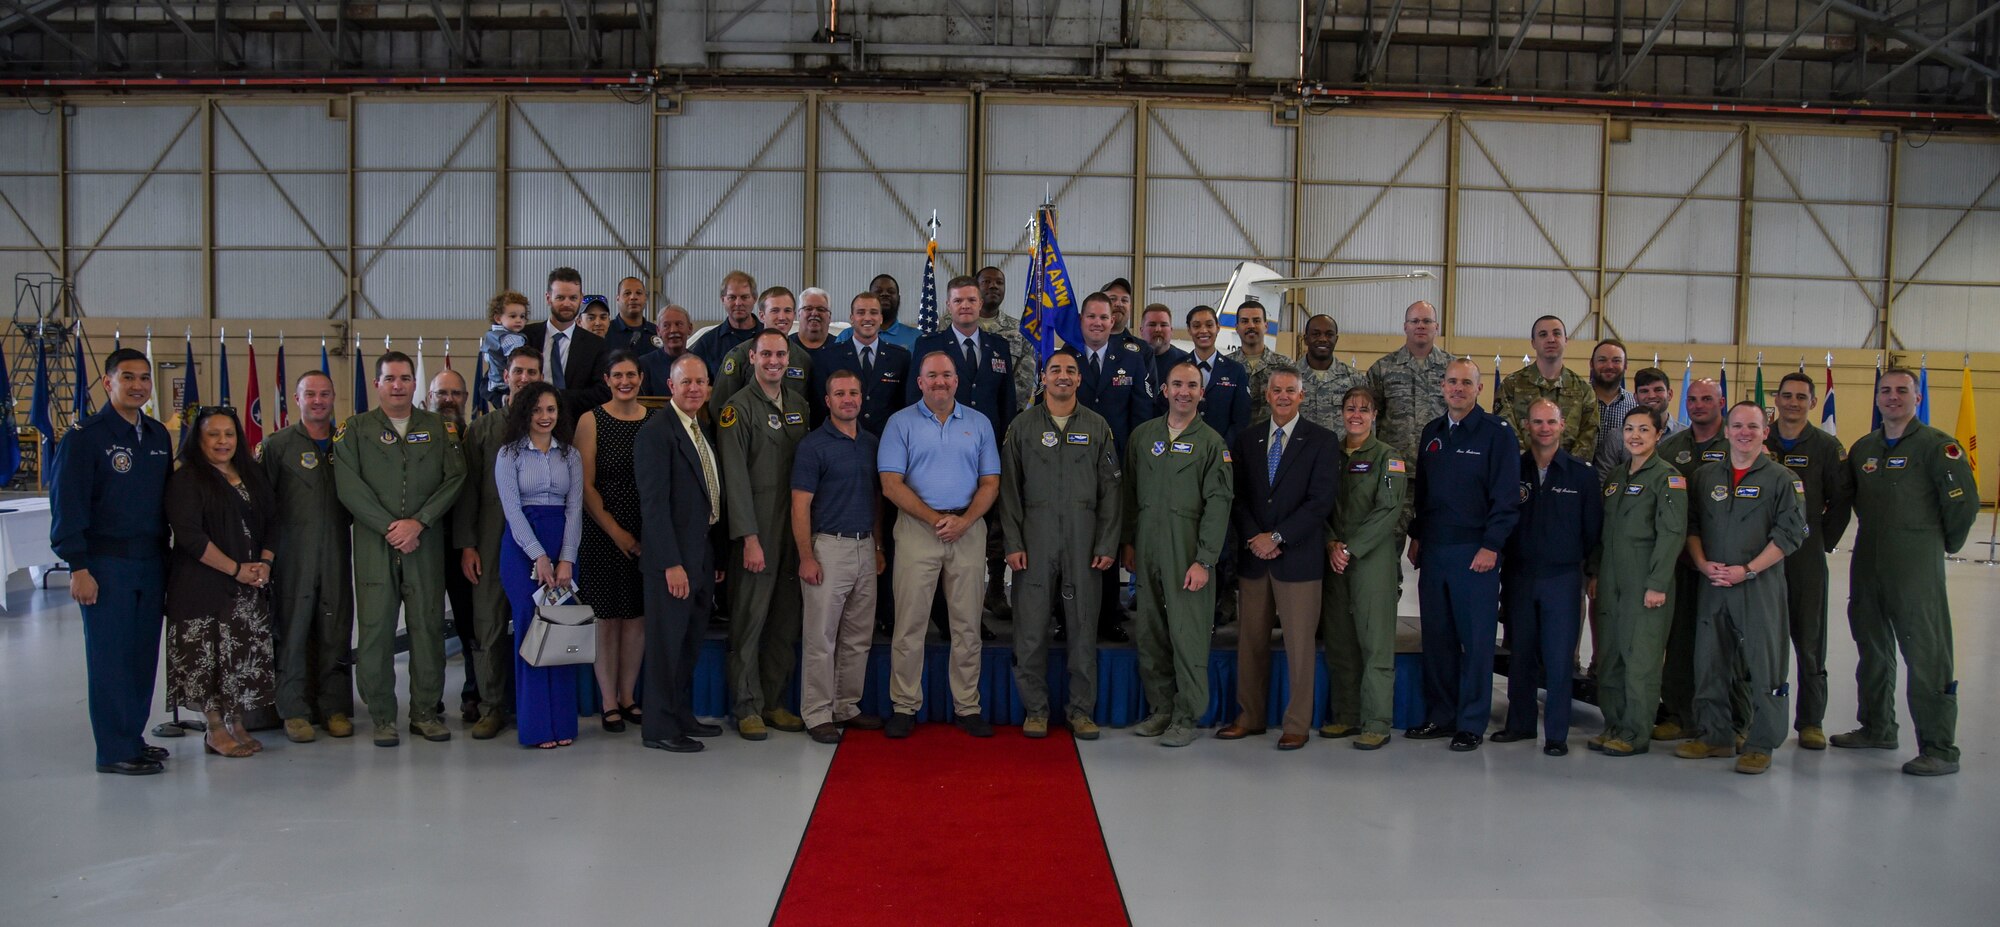 Past and present members of the 457th Airlift Squadron celebrated the squadron's heritage during an inactivation ceremony at Joint Base Andrews, Maryland, June 14, 2019.  (U.S. Air Force photo by Senior Airman Chad Gorecki)